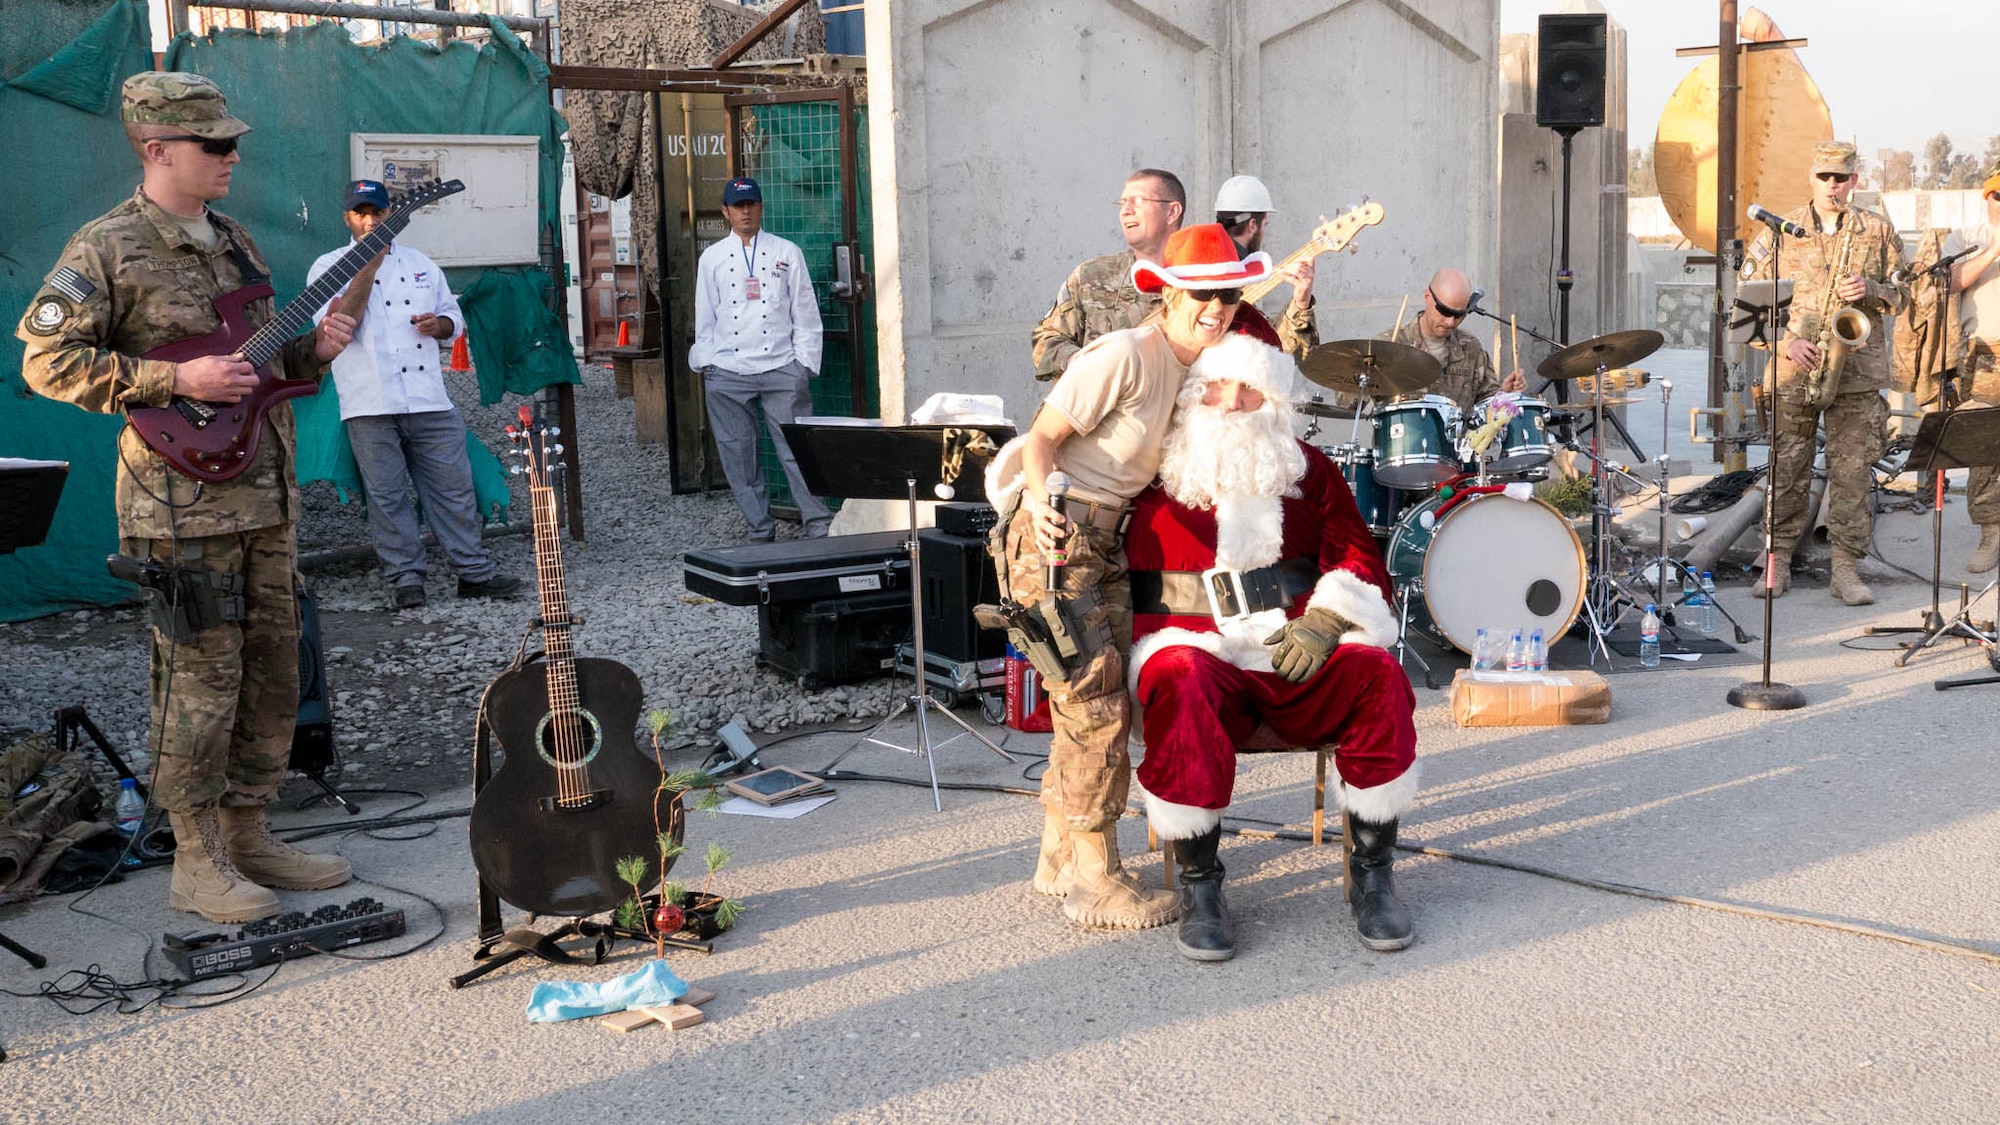 Tech. Sgt. Krista Joyce (right) and Staff Sgt. Jesse Thompson of the U.S. Air Forces Central Command Band join a visiting Santa Clause at Forward Operating Base FENTY, Afghanistan, on Dec 25, 2014. Pegasus in collaboration with the USO performed six hours worth of music over the course of a holiday celebration complete with food and free gifts to raise the spirits of deployed servicemen and women. (Courtesy Photo)
